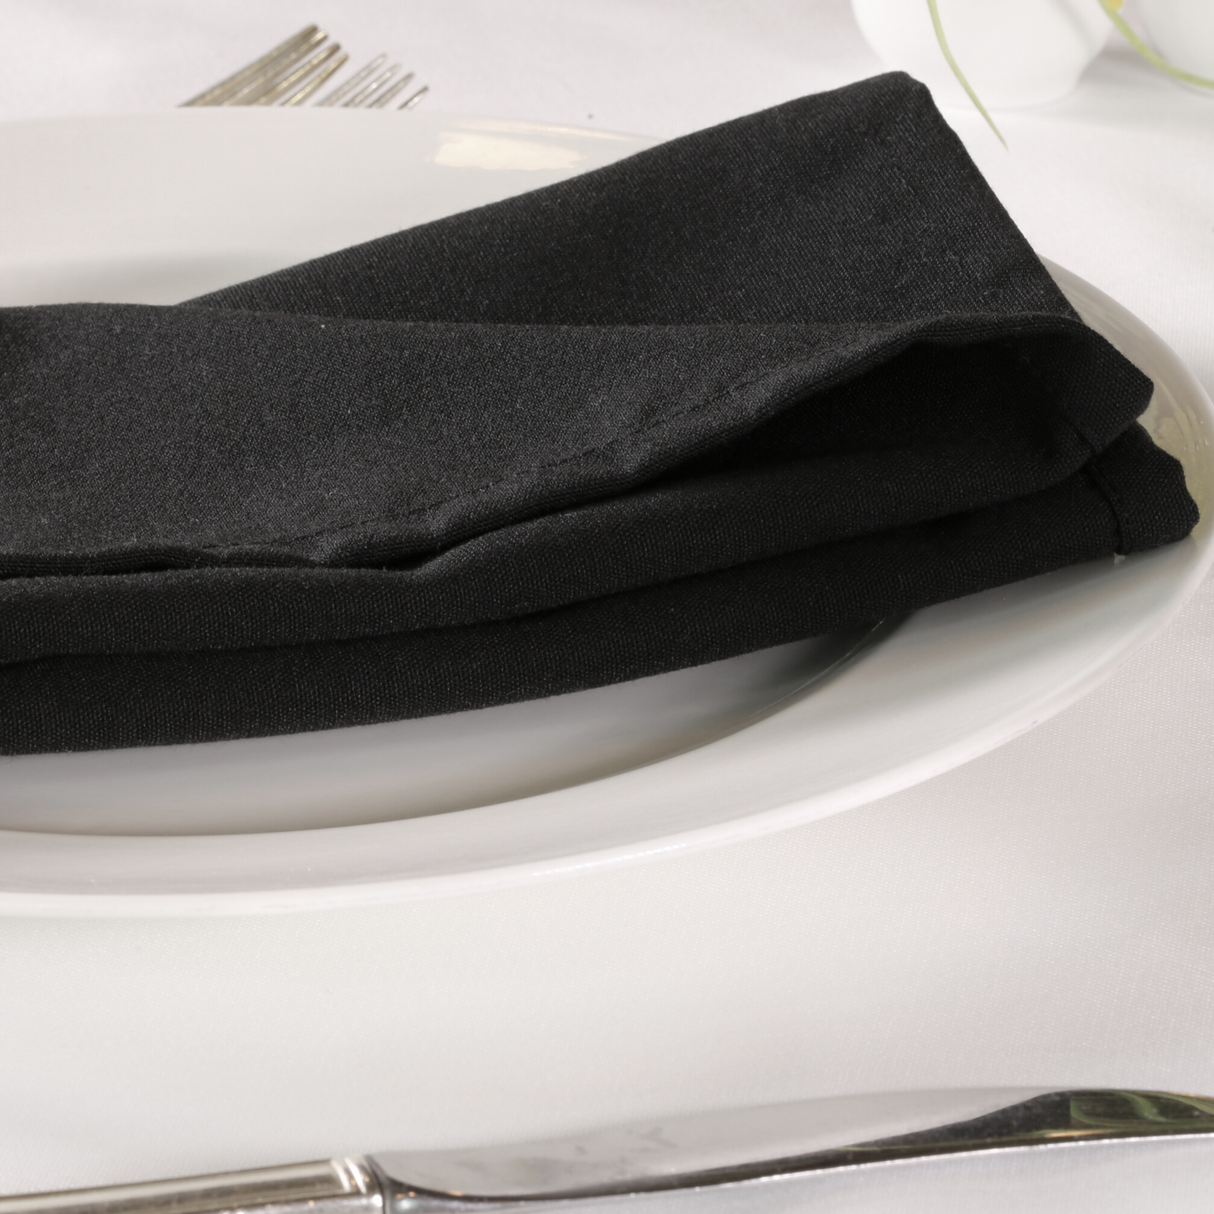 Black lieberspun napkins folded on a plate in a dressed up restaurant table